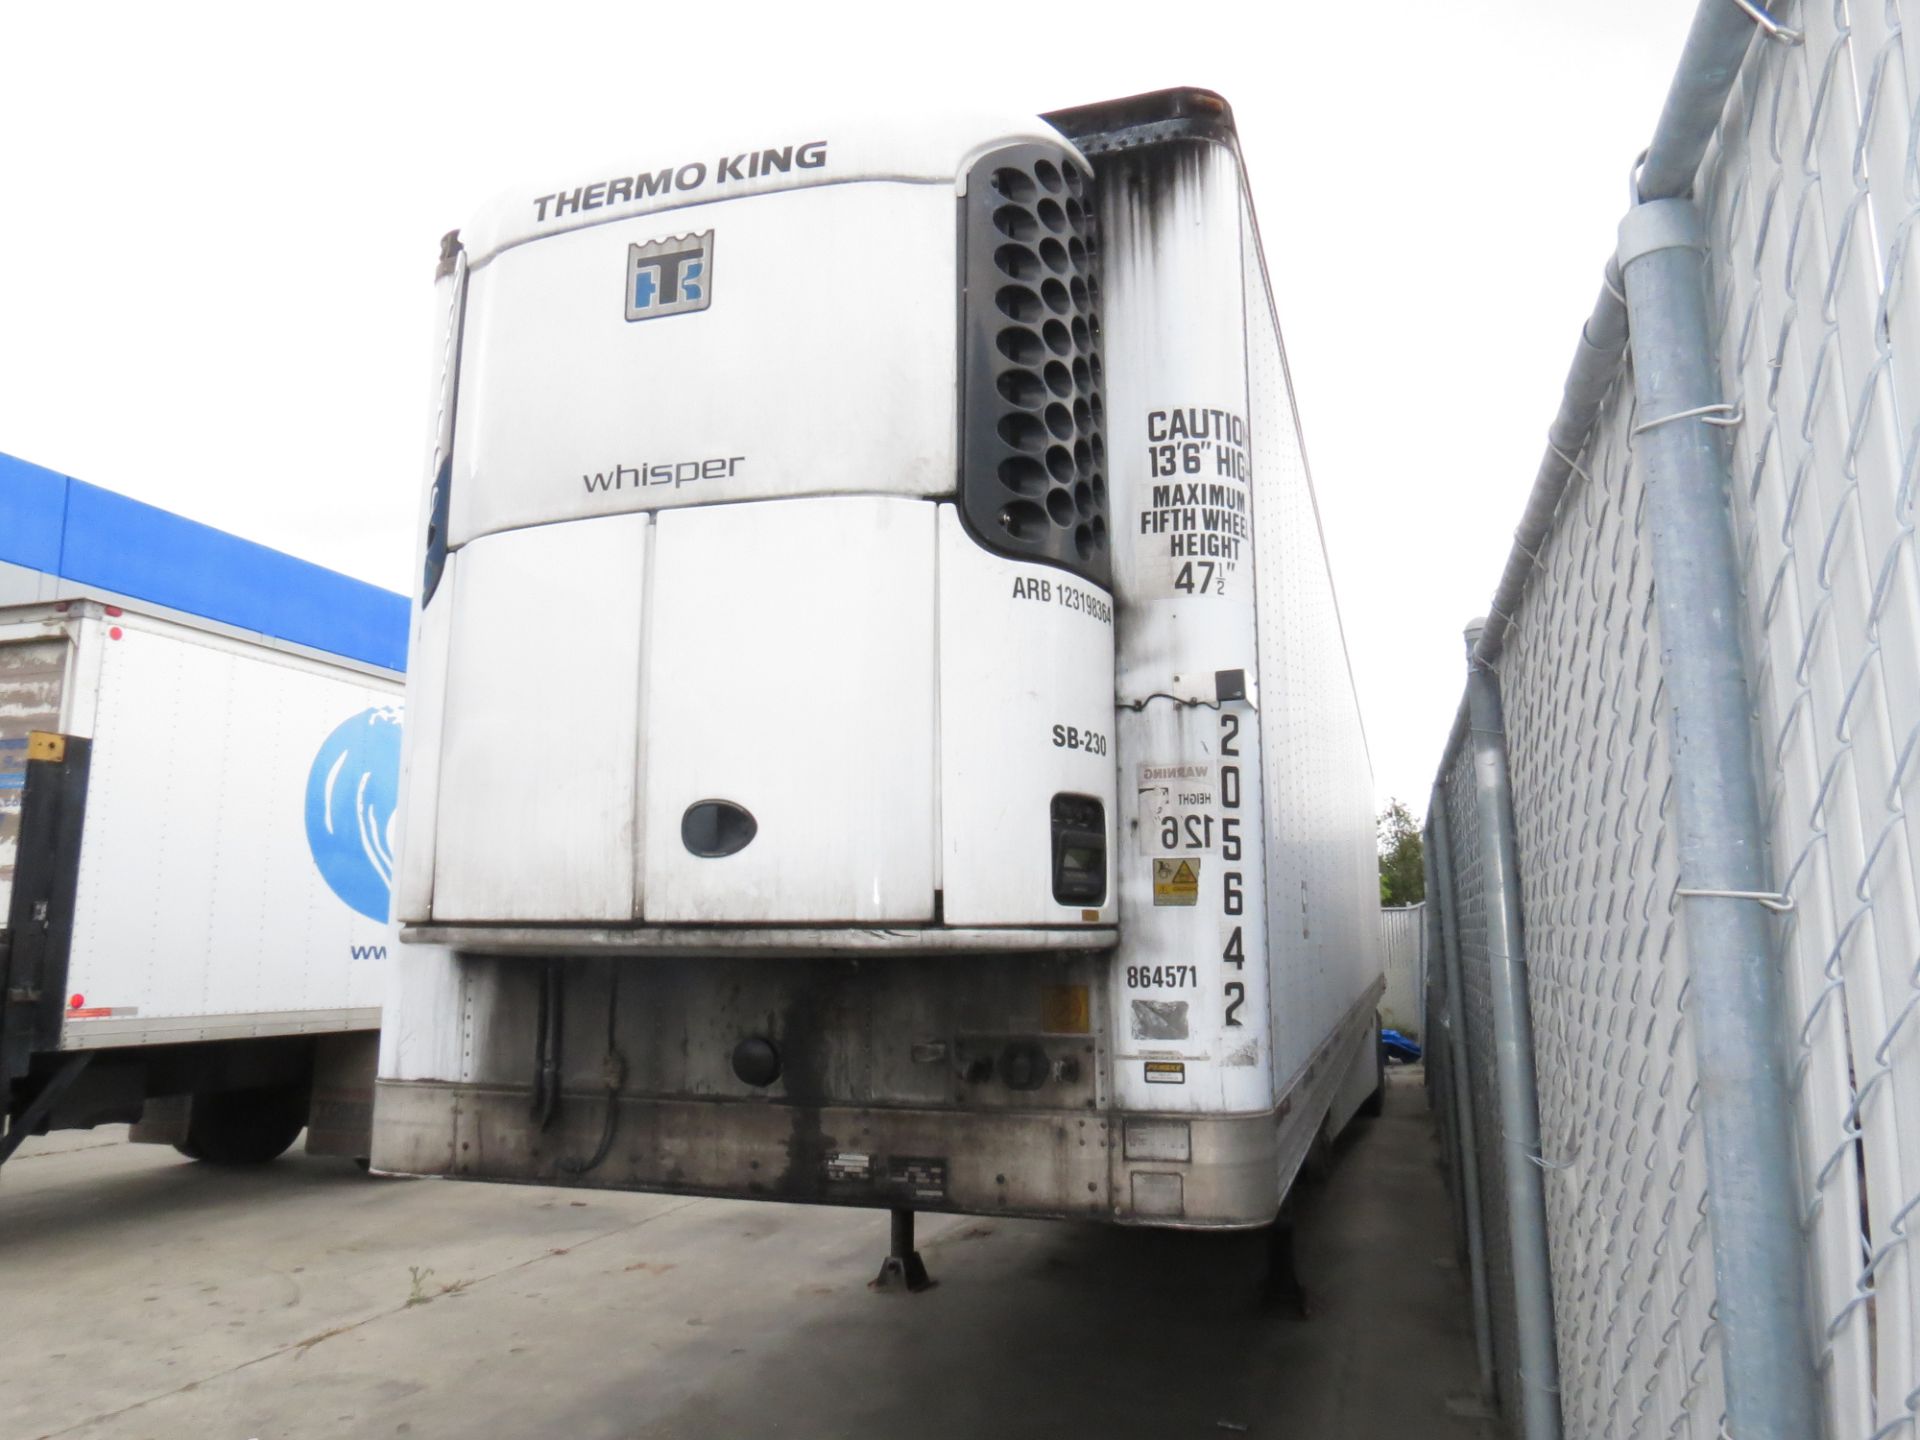 1997 Trailmobile 53' Thermo King Smart Reefer #3 Trailer, Model - 01AC-1UAY, VIN: 1PT01ACHXW9001357, - Image 3 of 9